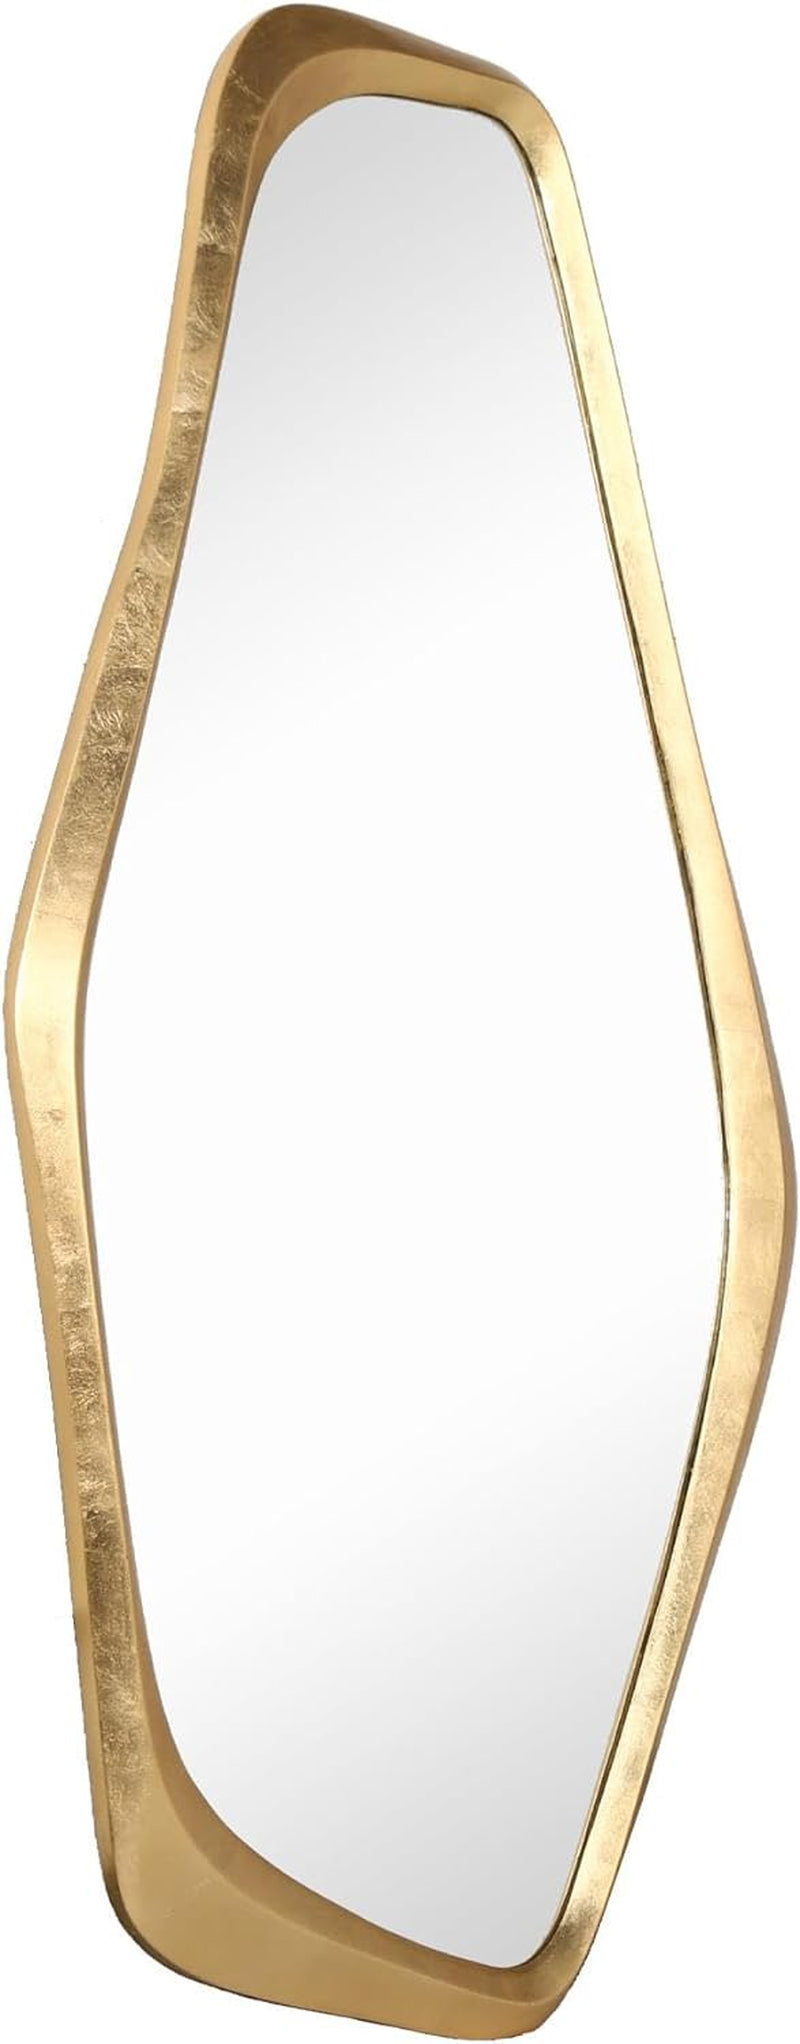 Decorative Gold Wall Mirrors for Bathroom and Living Room Decor - 47.2 H